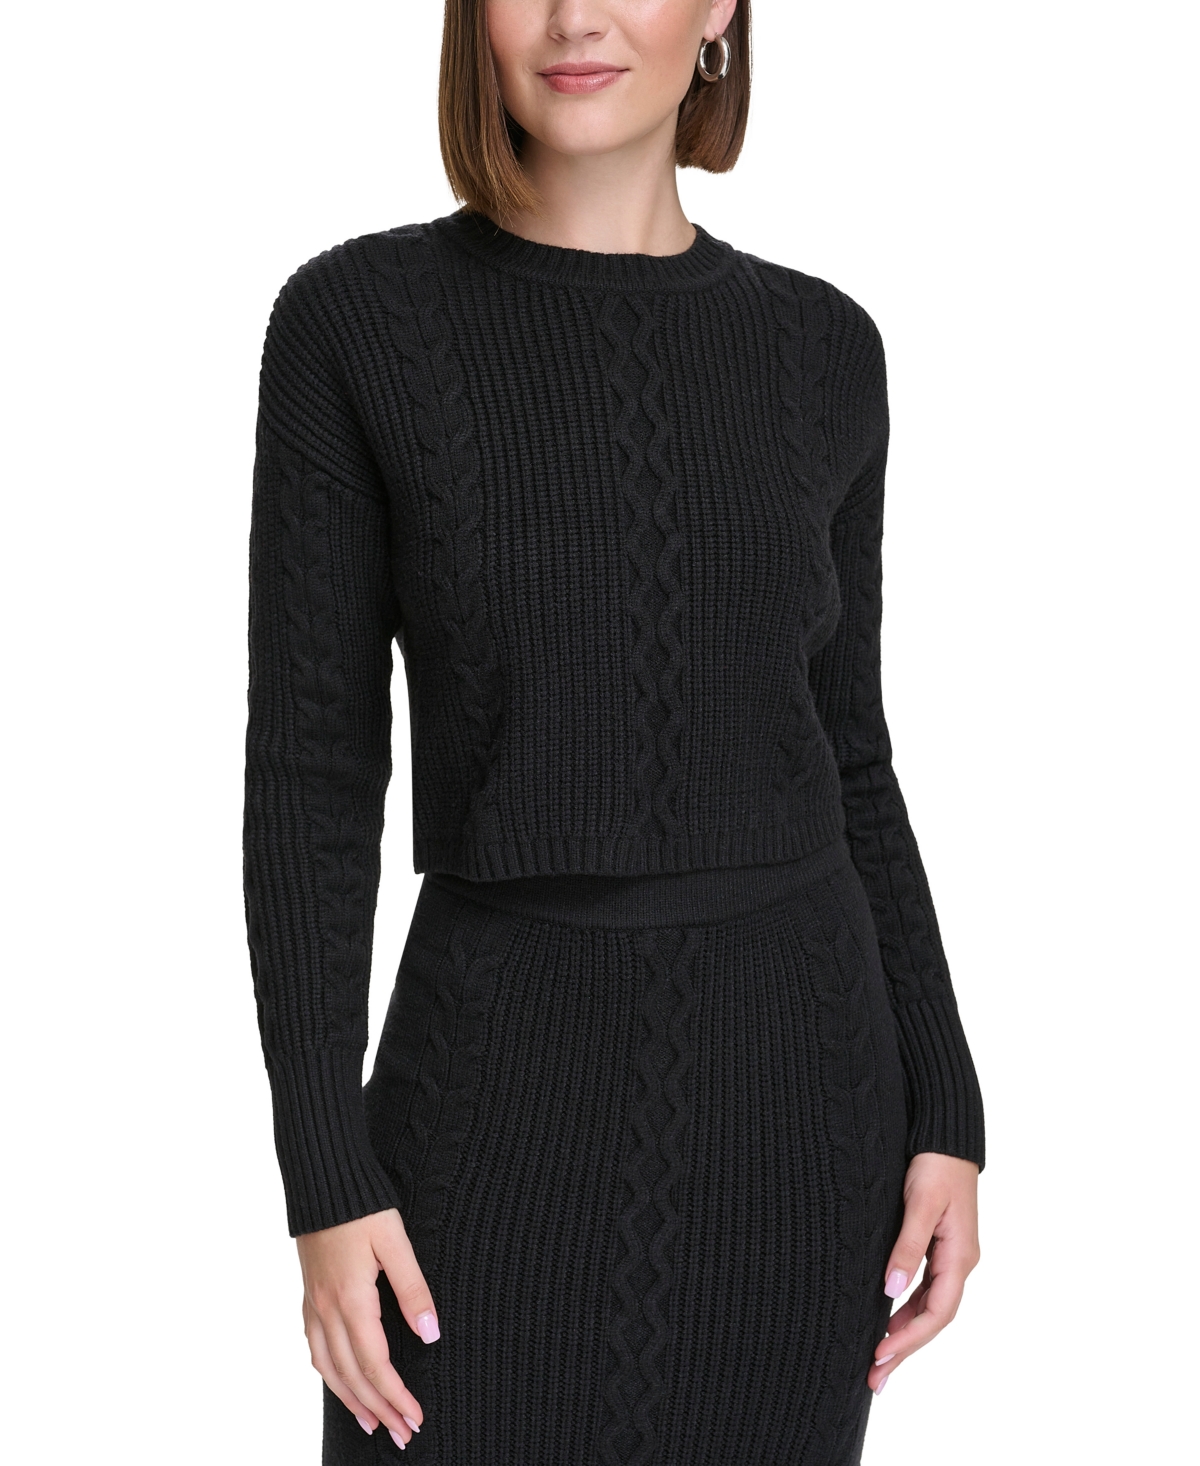 Women's Cropped Cable-Knit Crewneck Sweater - Black